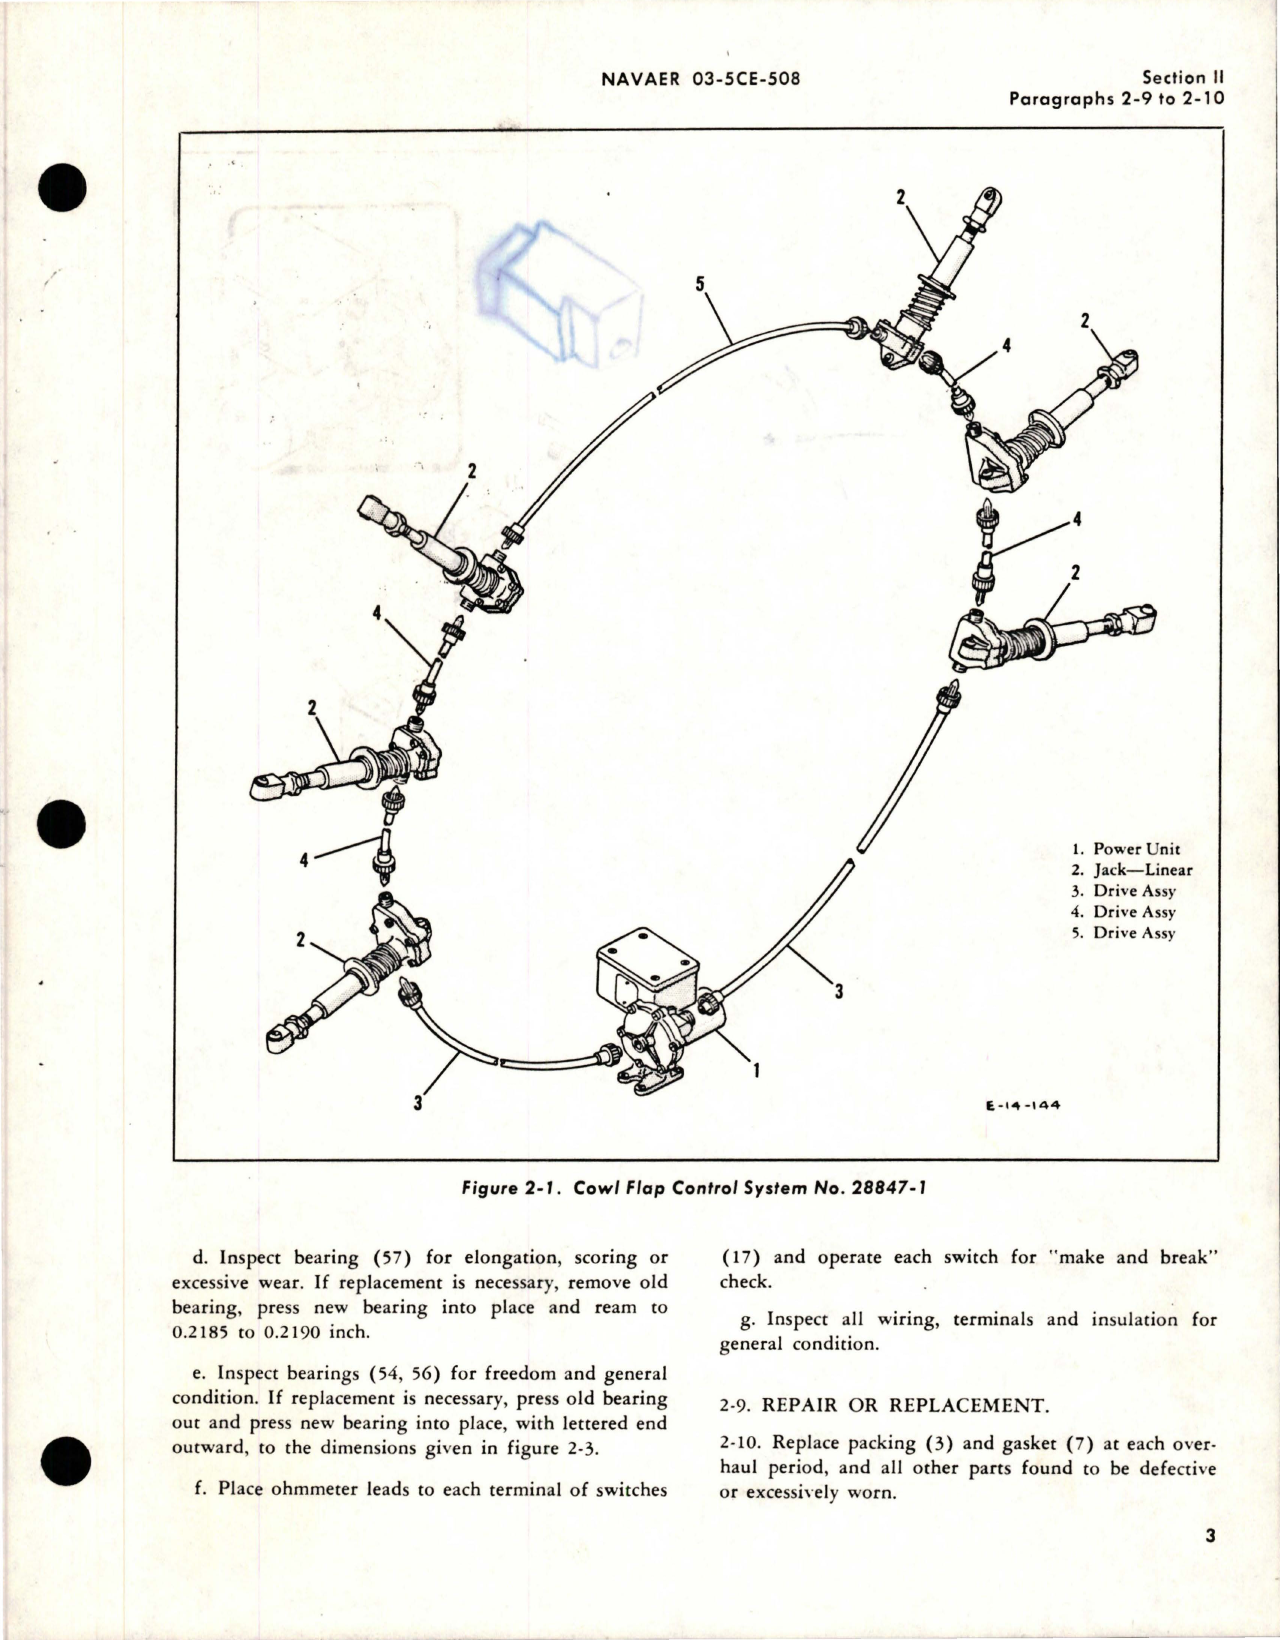 Sample page 7 from AirCorps Library document: Overhaul Instructions for Cowl Flap Control System - Part 28847-1